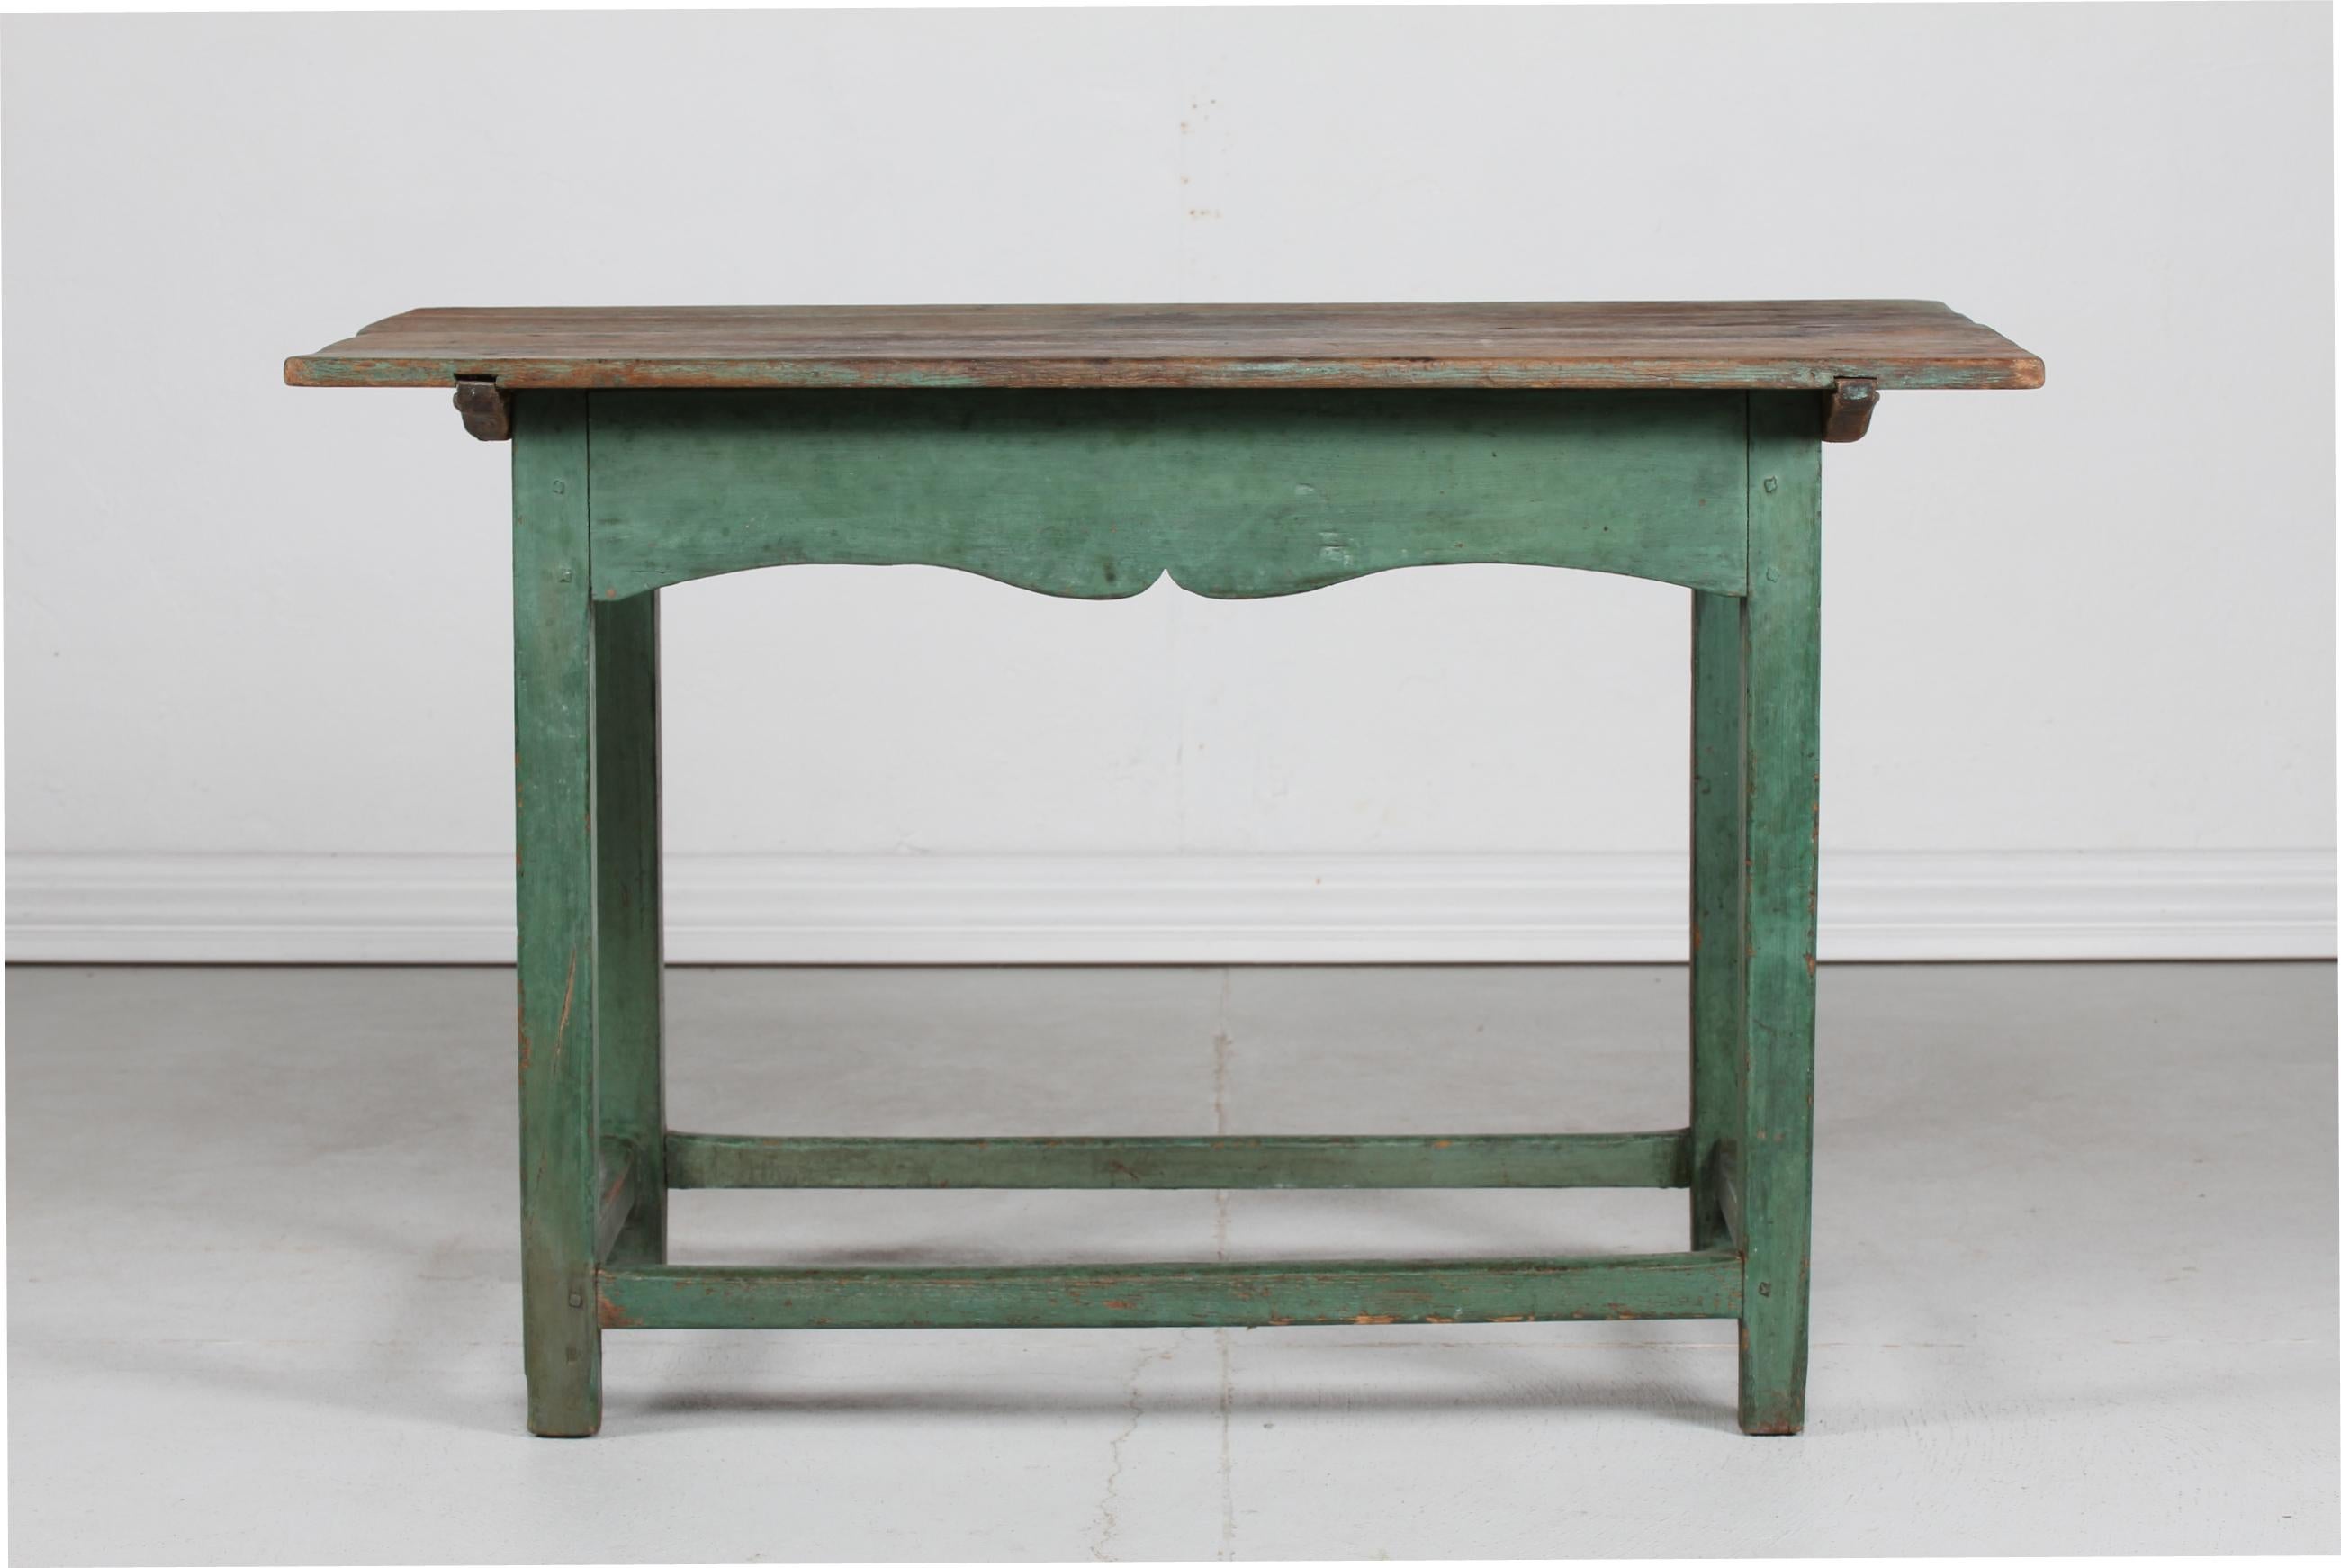 Antique Scandinavian country side working table from the 19th century made of pine wood. 
The frame of table is hand painted with matte green paint with great patina 
and the paint on the top has been worn off through many years of